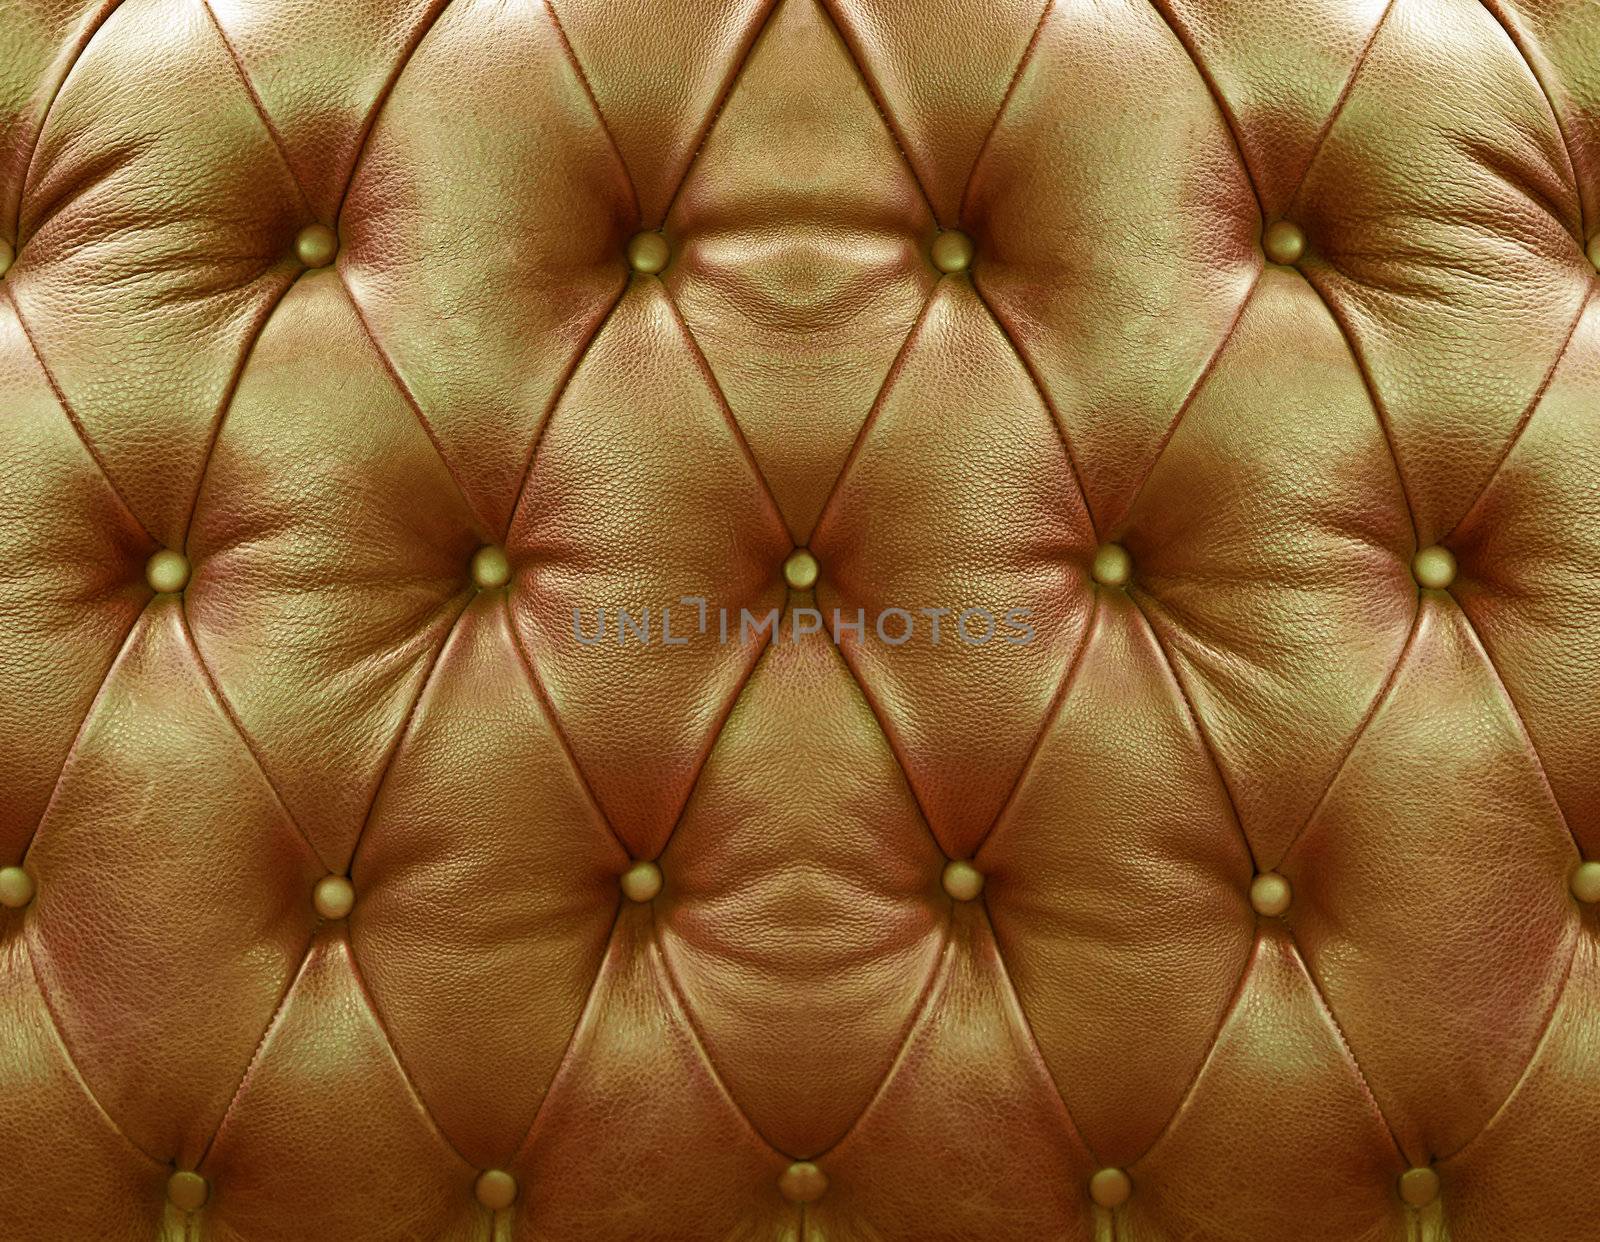 Golden upholstery leather pattern background